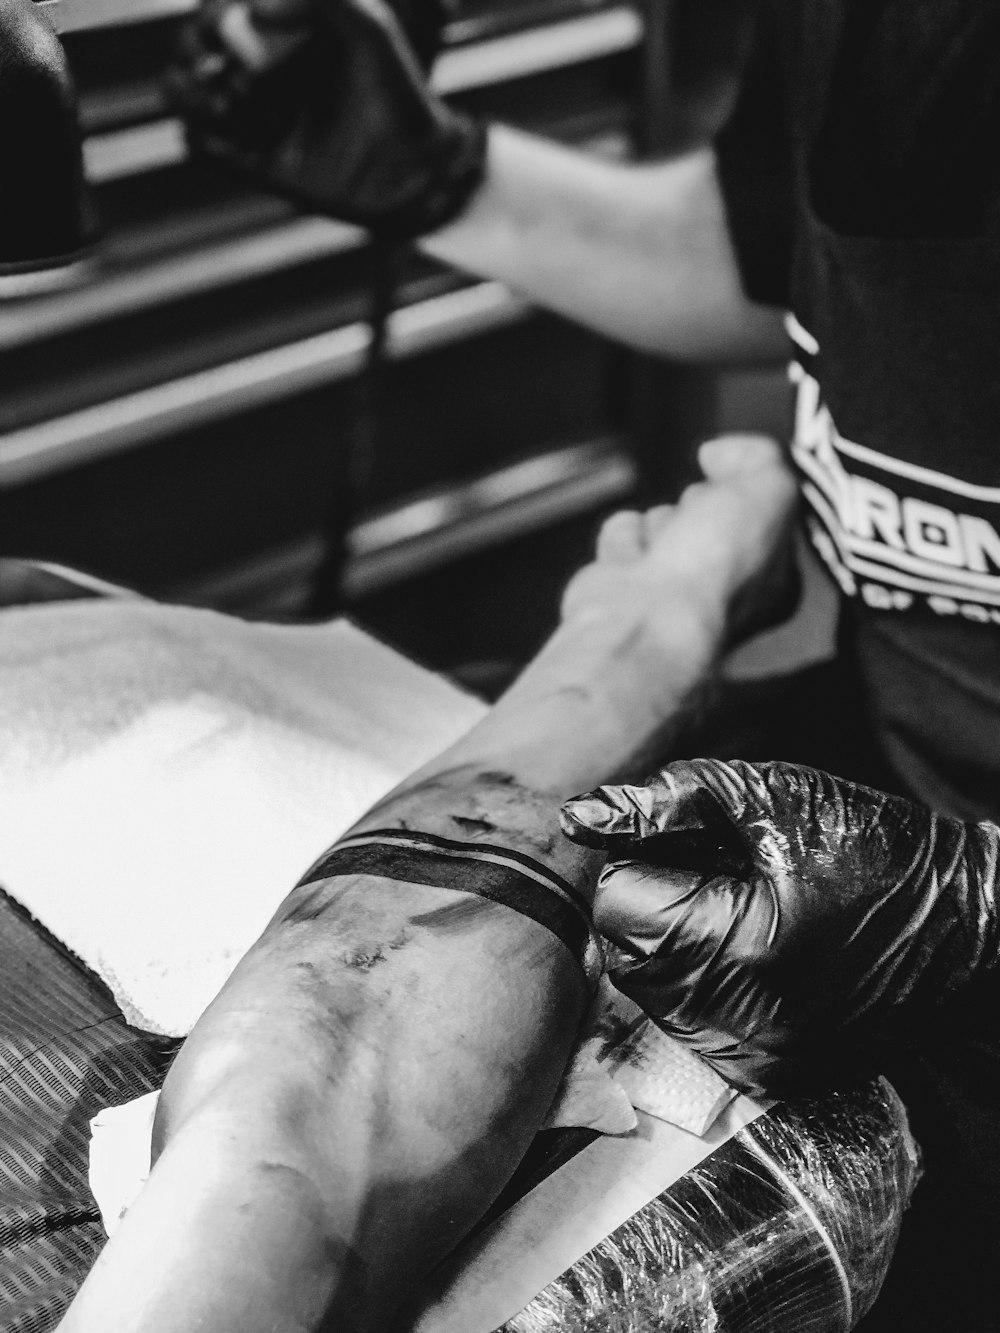 a black and white photo of a person getting a tattoo